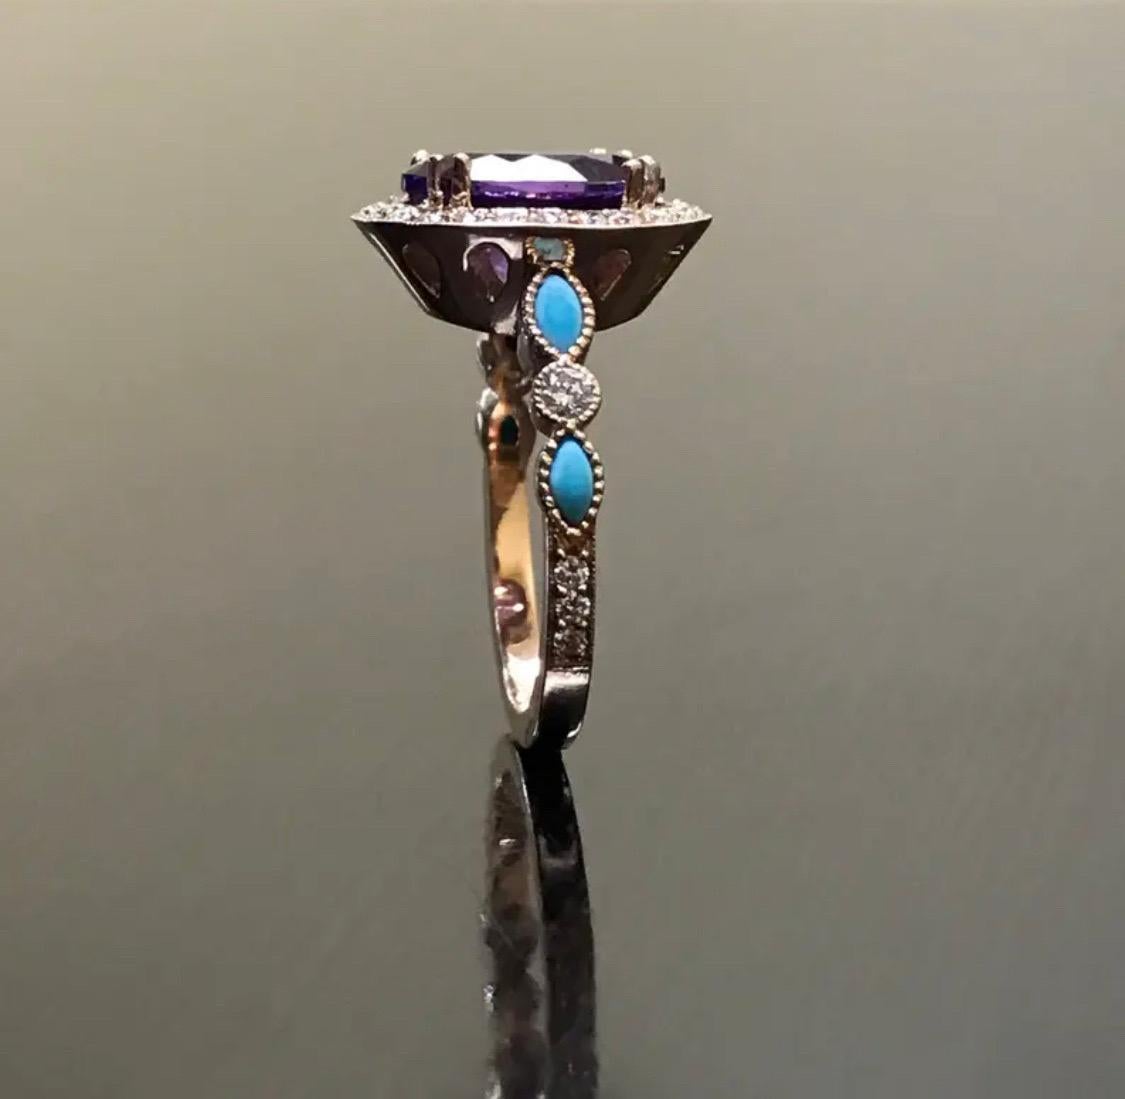 DeKara Designs Collection

Metal- 18K Rose Gold, .750.

Stones- Center Features an Oval Amethyst 11 x 9 MM, Four Marquise Turquoise, Two Round Opals, 30 Round Diamonds F-G Color VS2 Clarity, 0.40 Carats.

Size- 4-12

Beautiful Handmade Art Deco